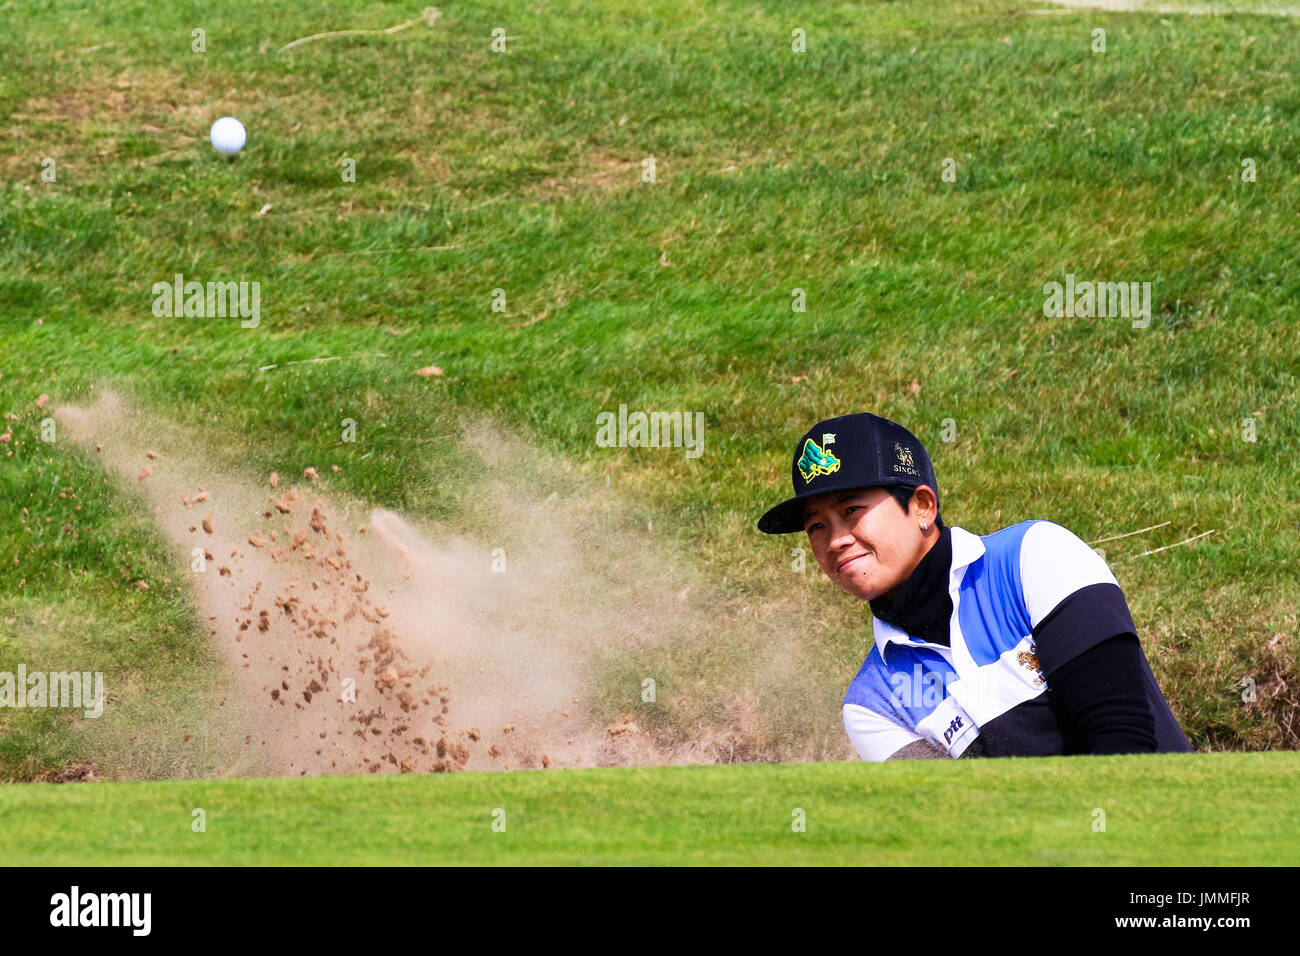 Irvine, Scotland, UK. 28th July, 2017. On the second day of the Scottish Open, players were hoping to play well and make the cut. After the calm weather on the first day some players were finding the conditions of strong winds and links style golf difficult while others played better than on the first round. Credit: Findlay/Alamy Live News Stock Photo